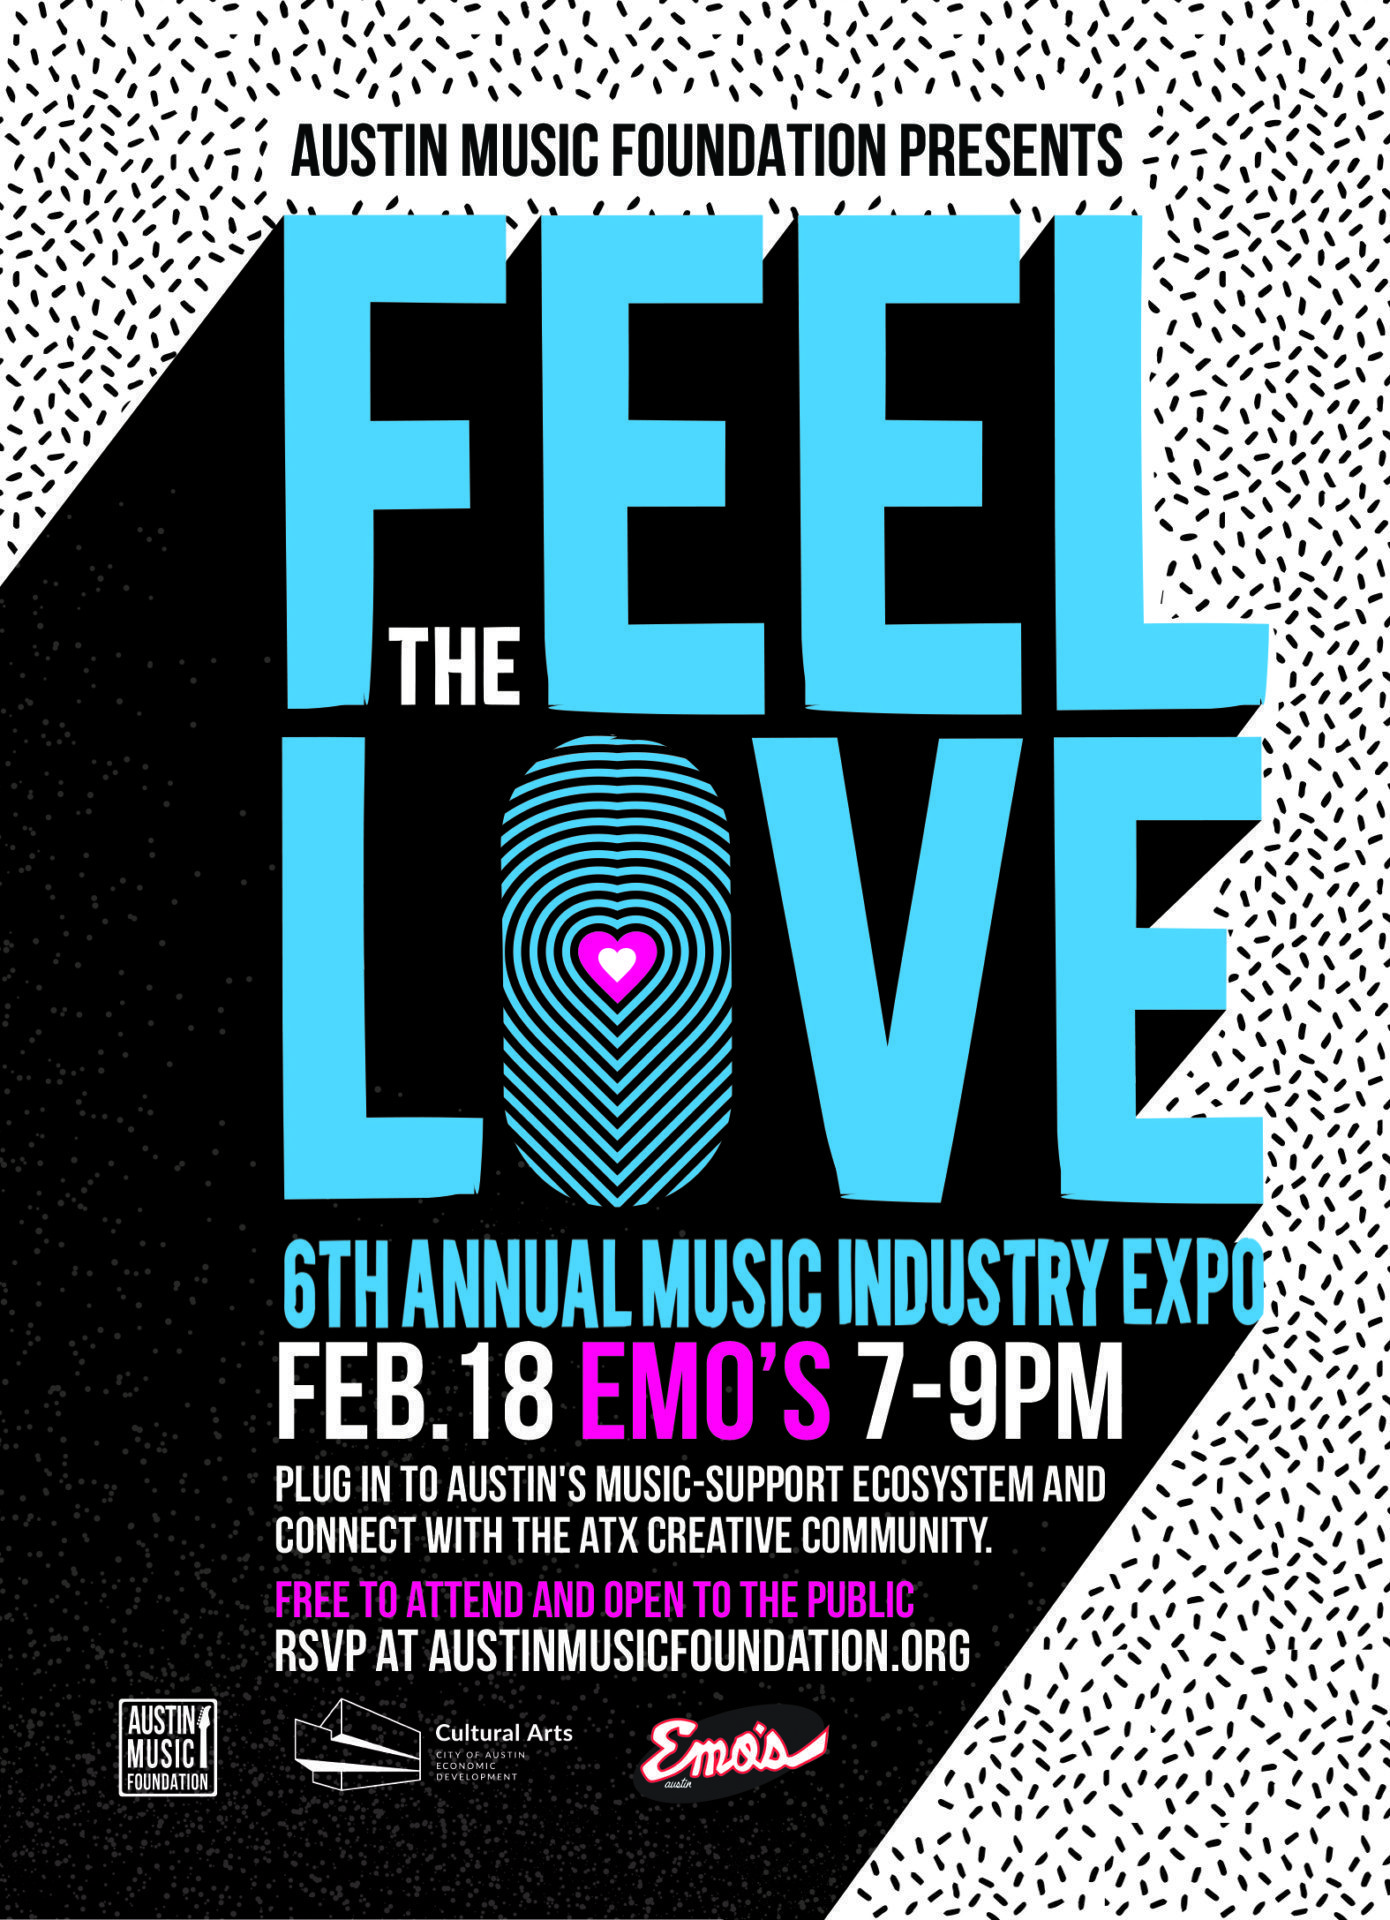 Meet the Orgs: 6th Annual ‘Feel the Love’ Music Industry Expo